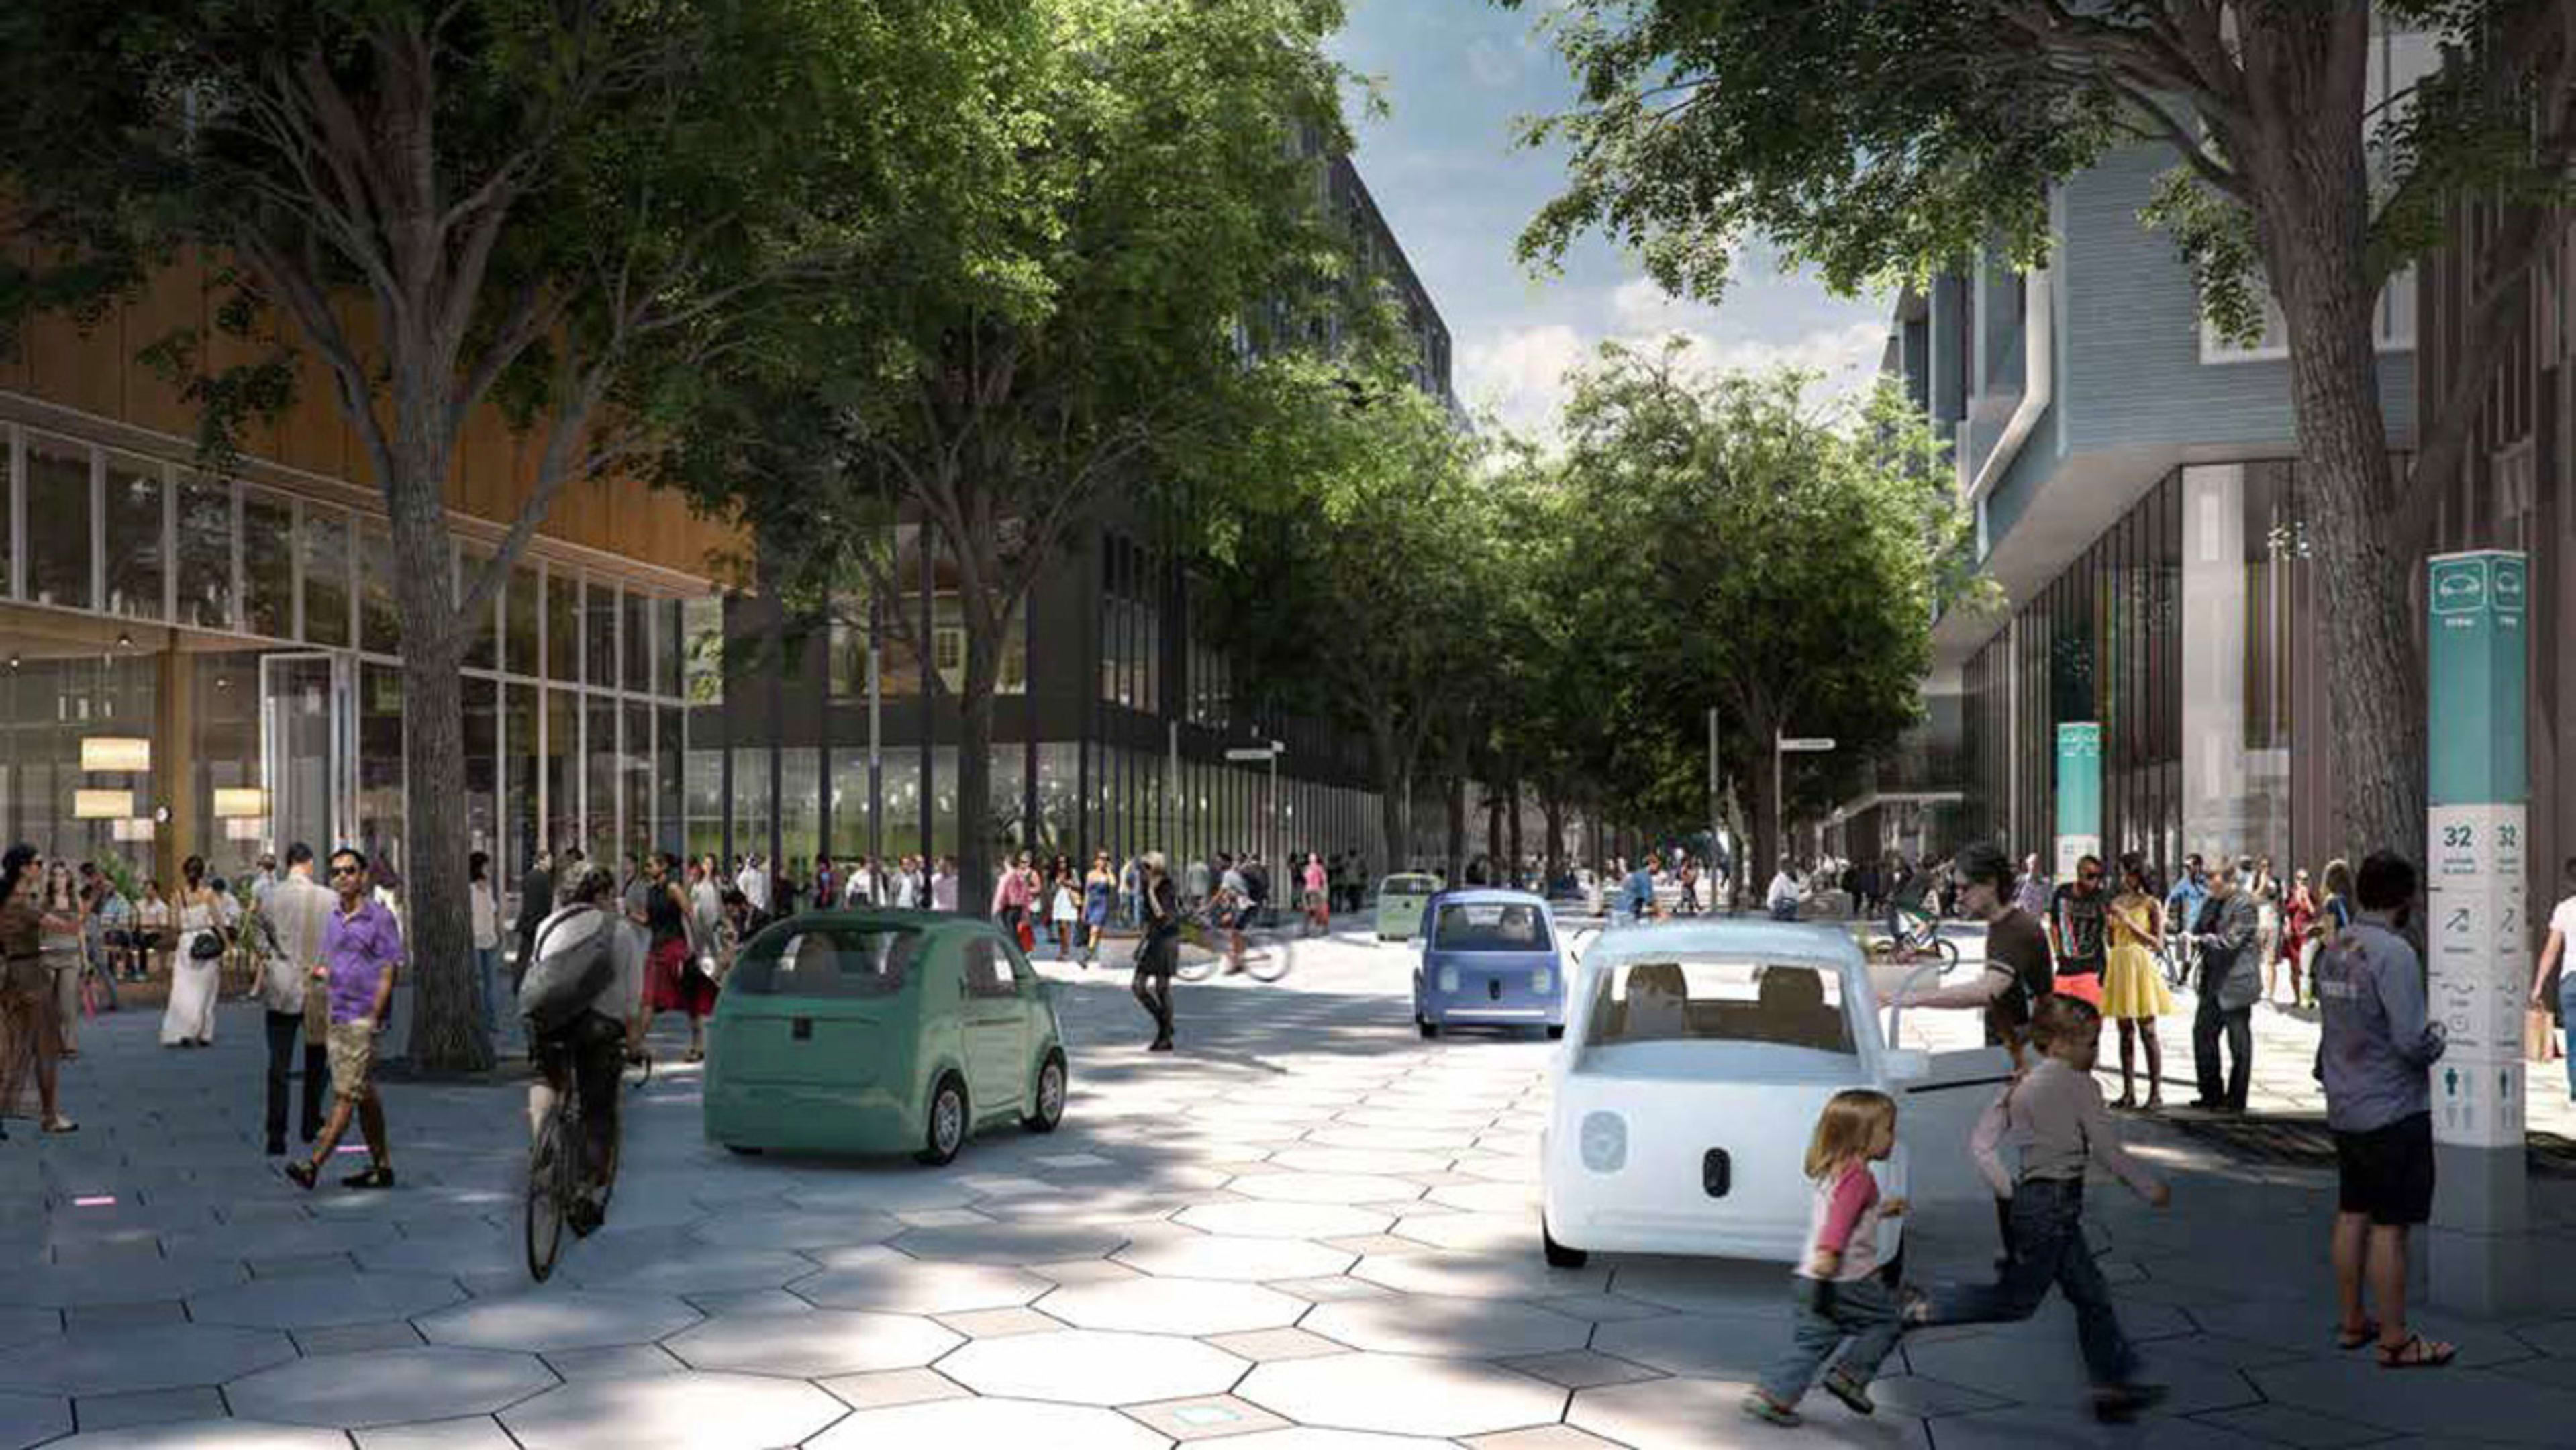 Our first look at Alphabet’s smart city